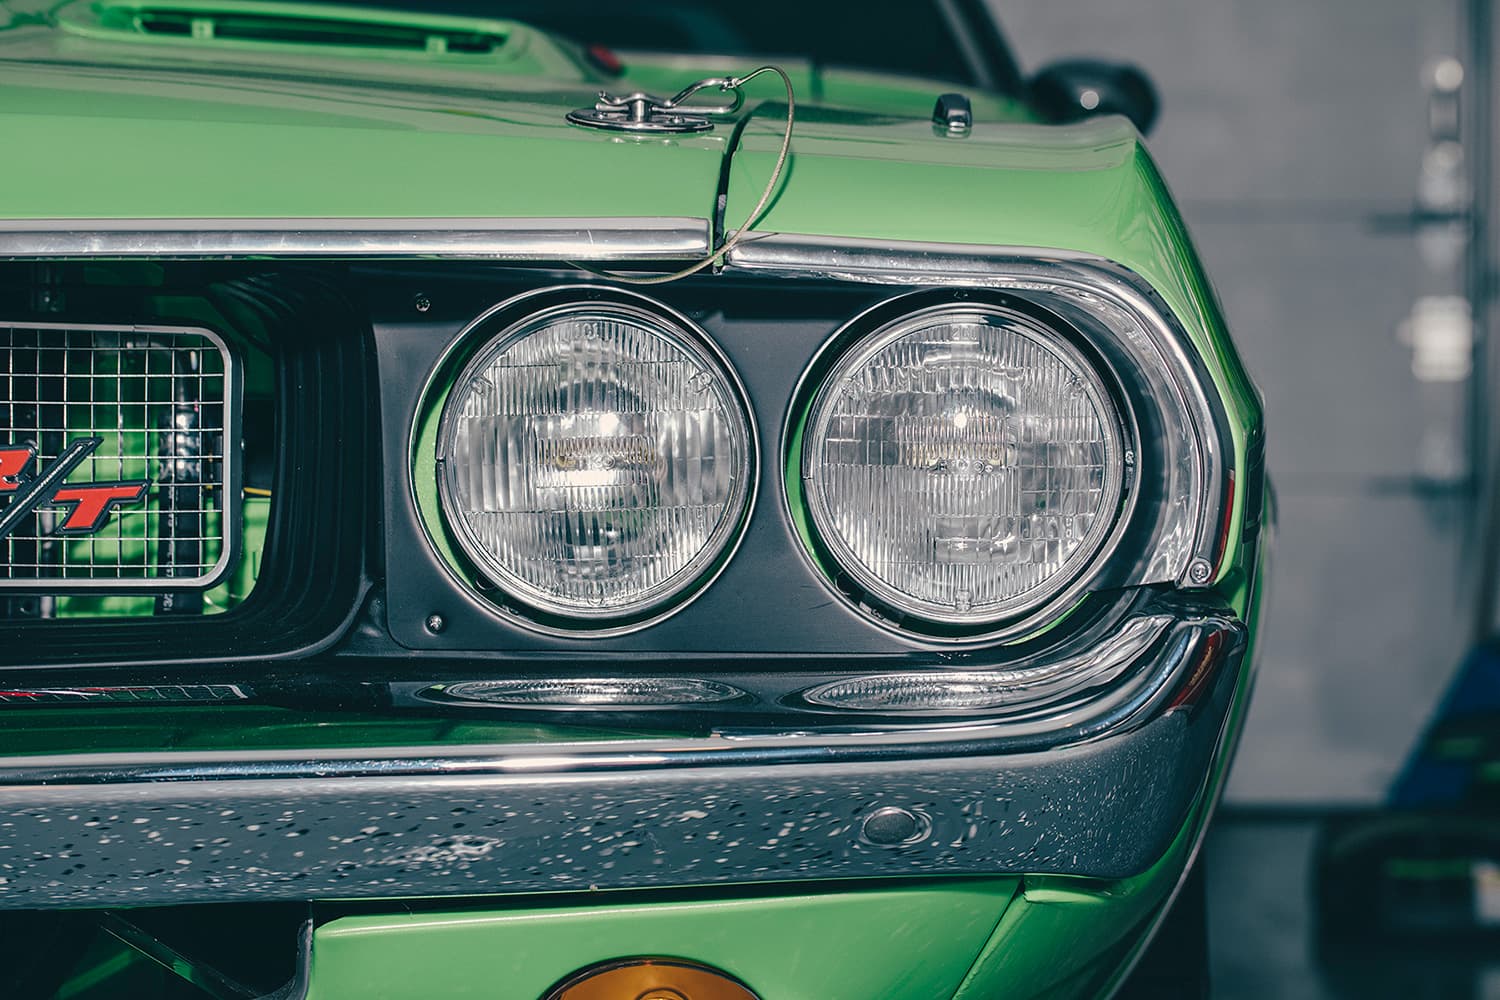 Close-up of the headlight of a green Mustang